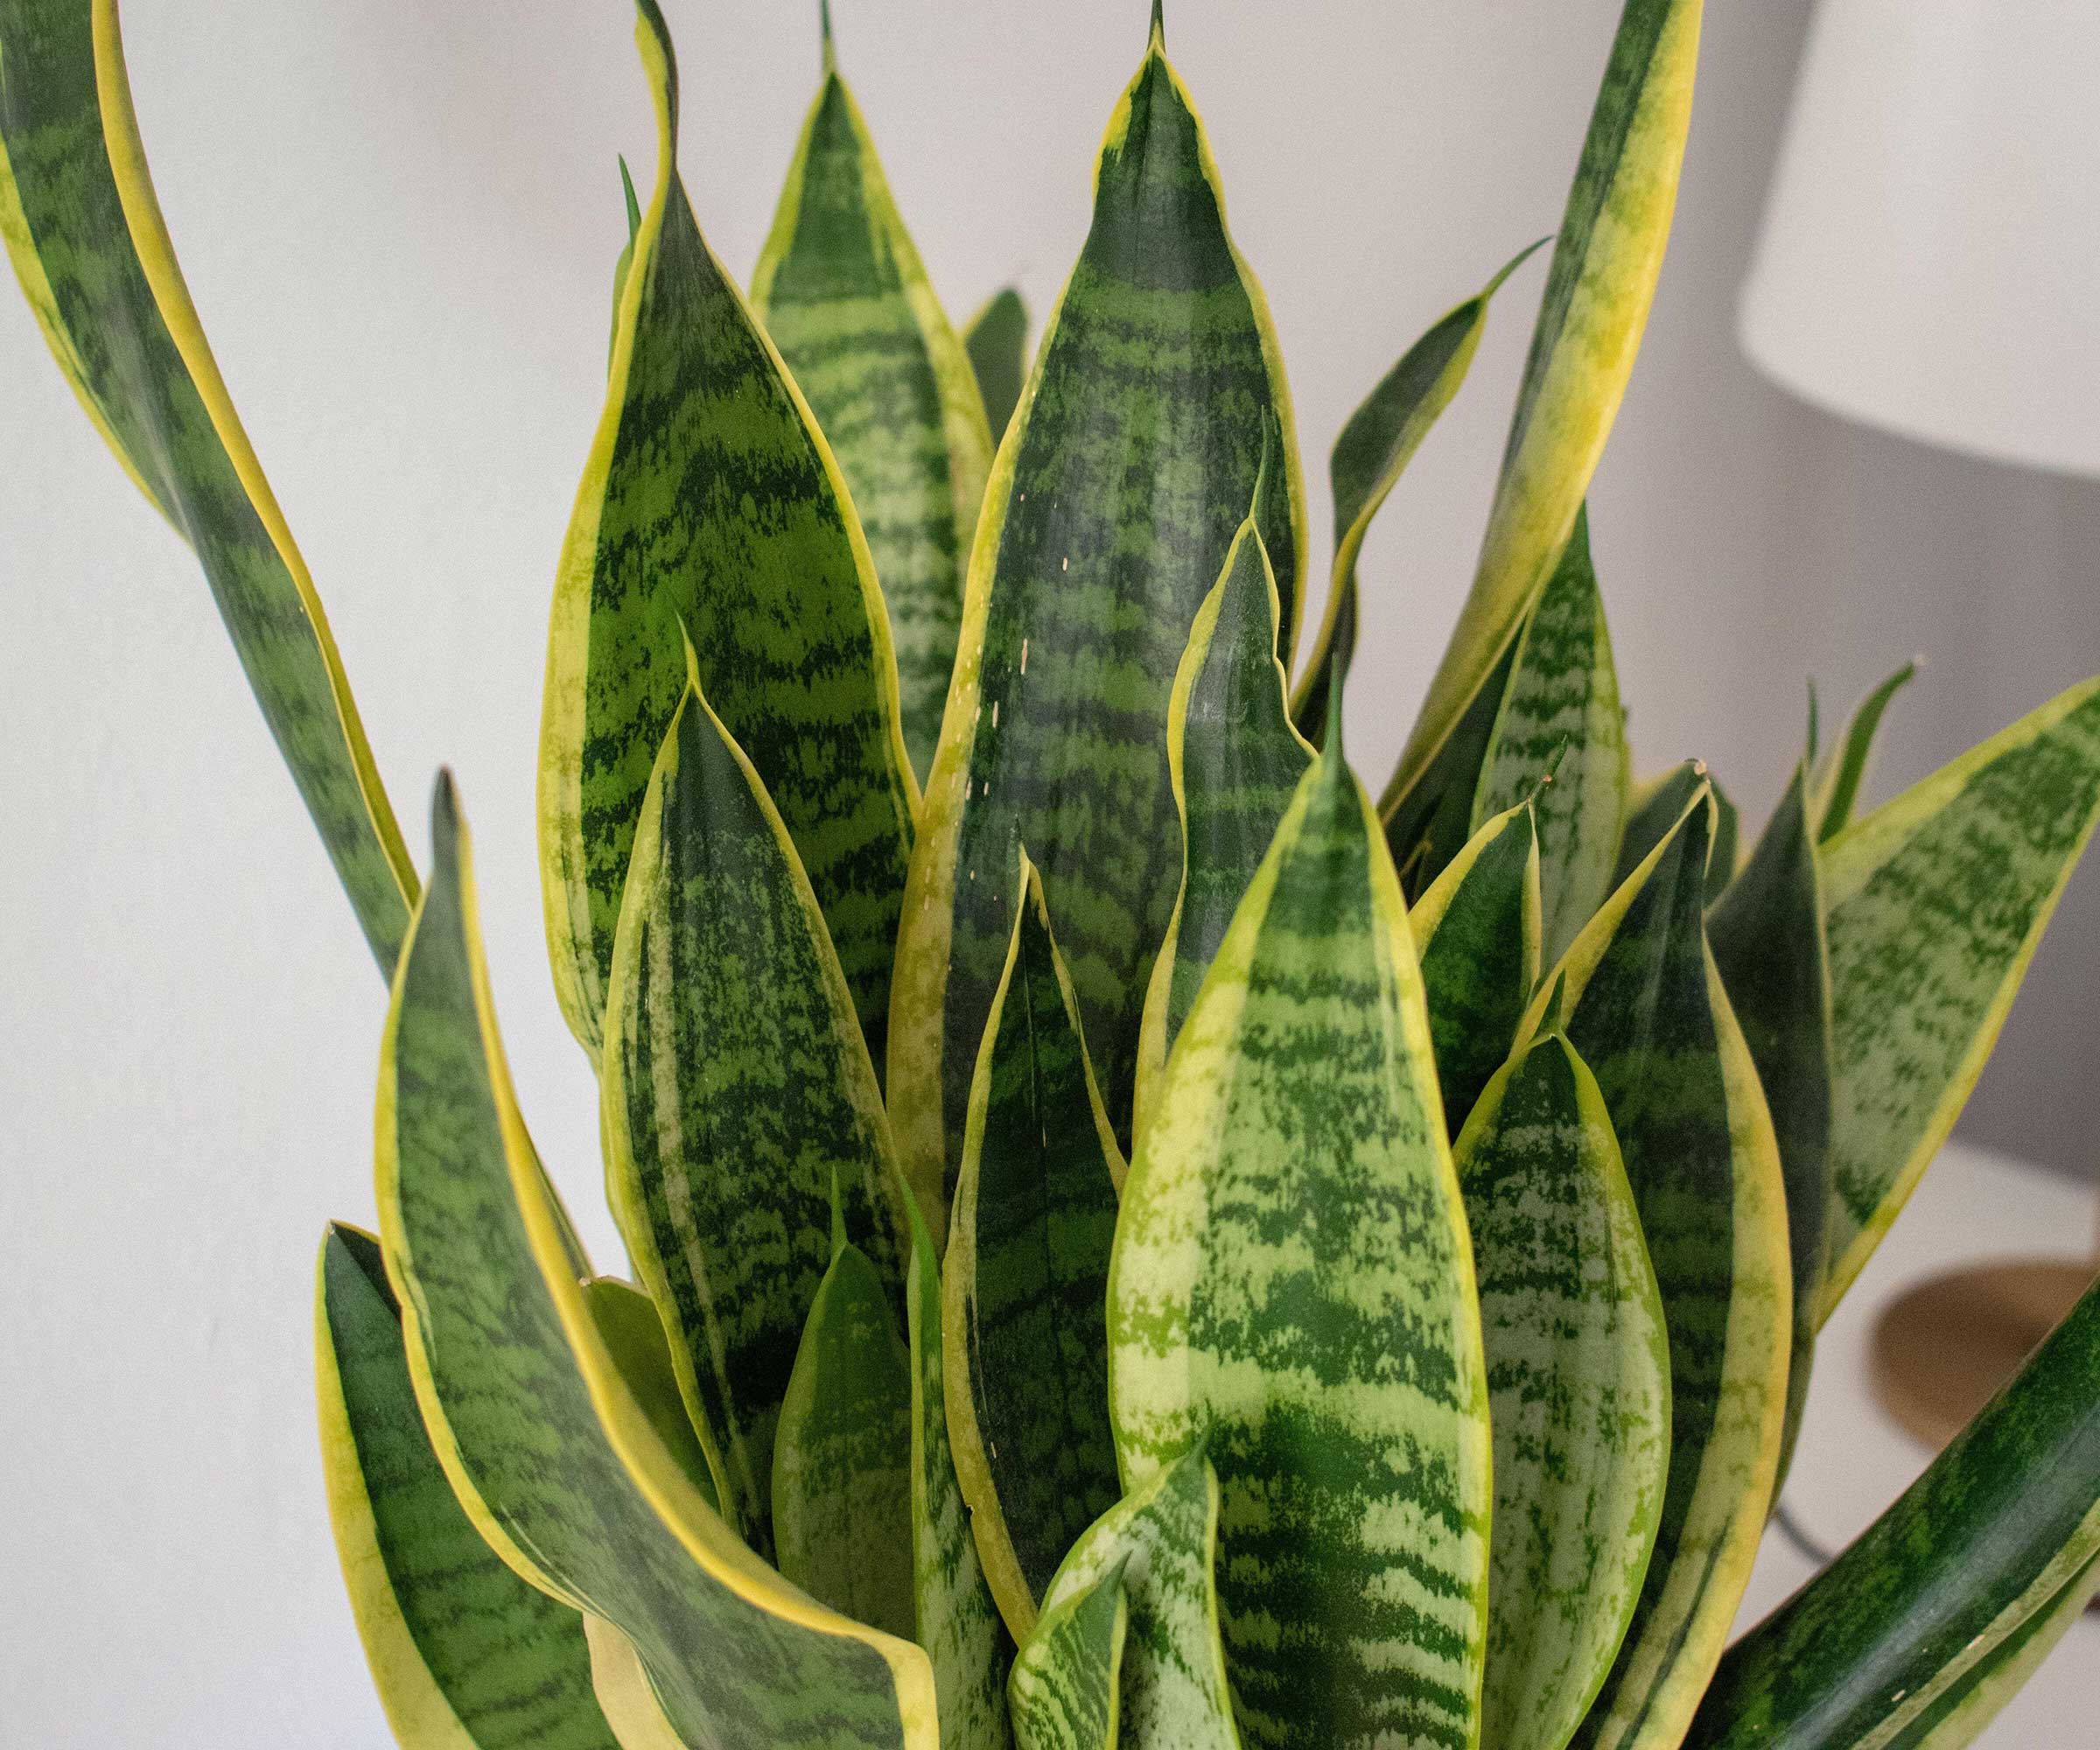 Why is my snake plant dying? Potential reasons and solutions